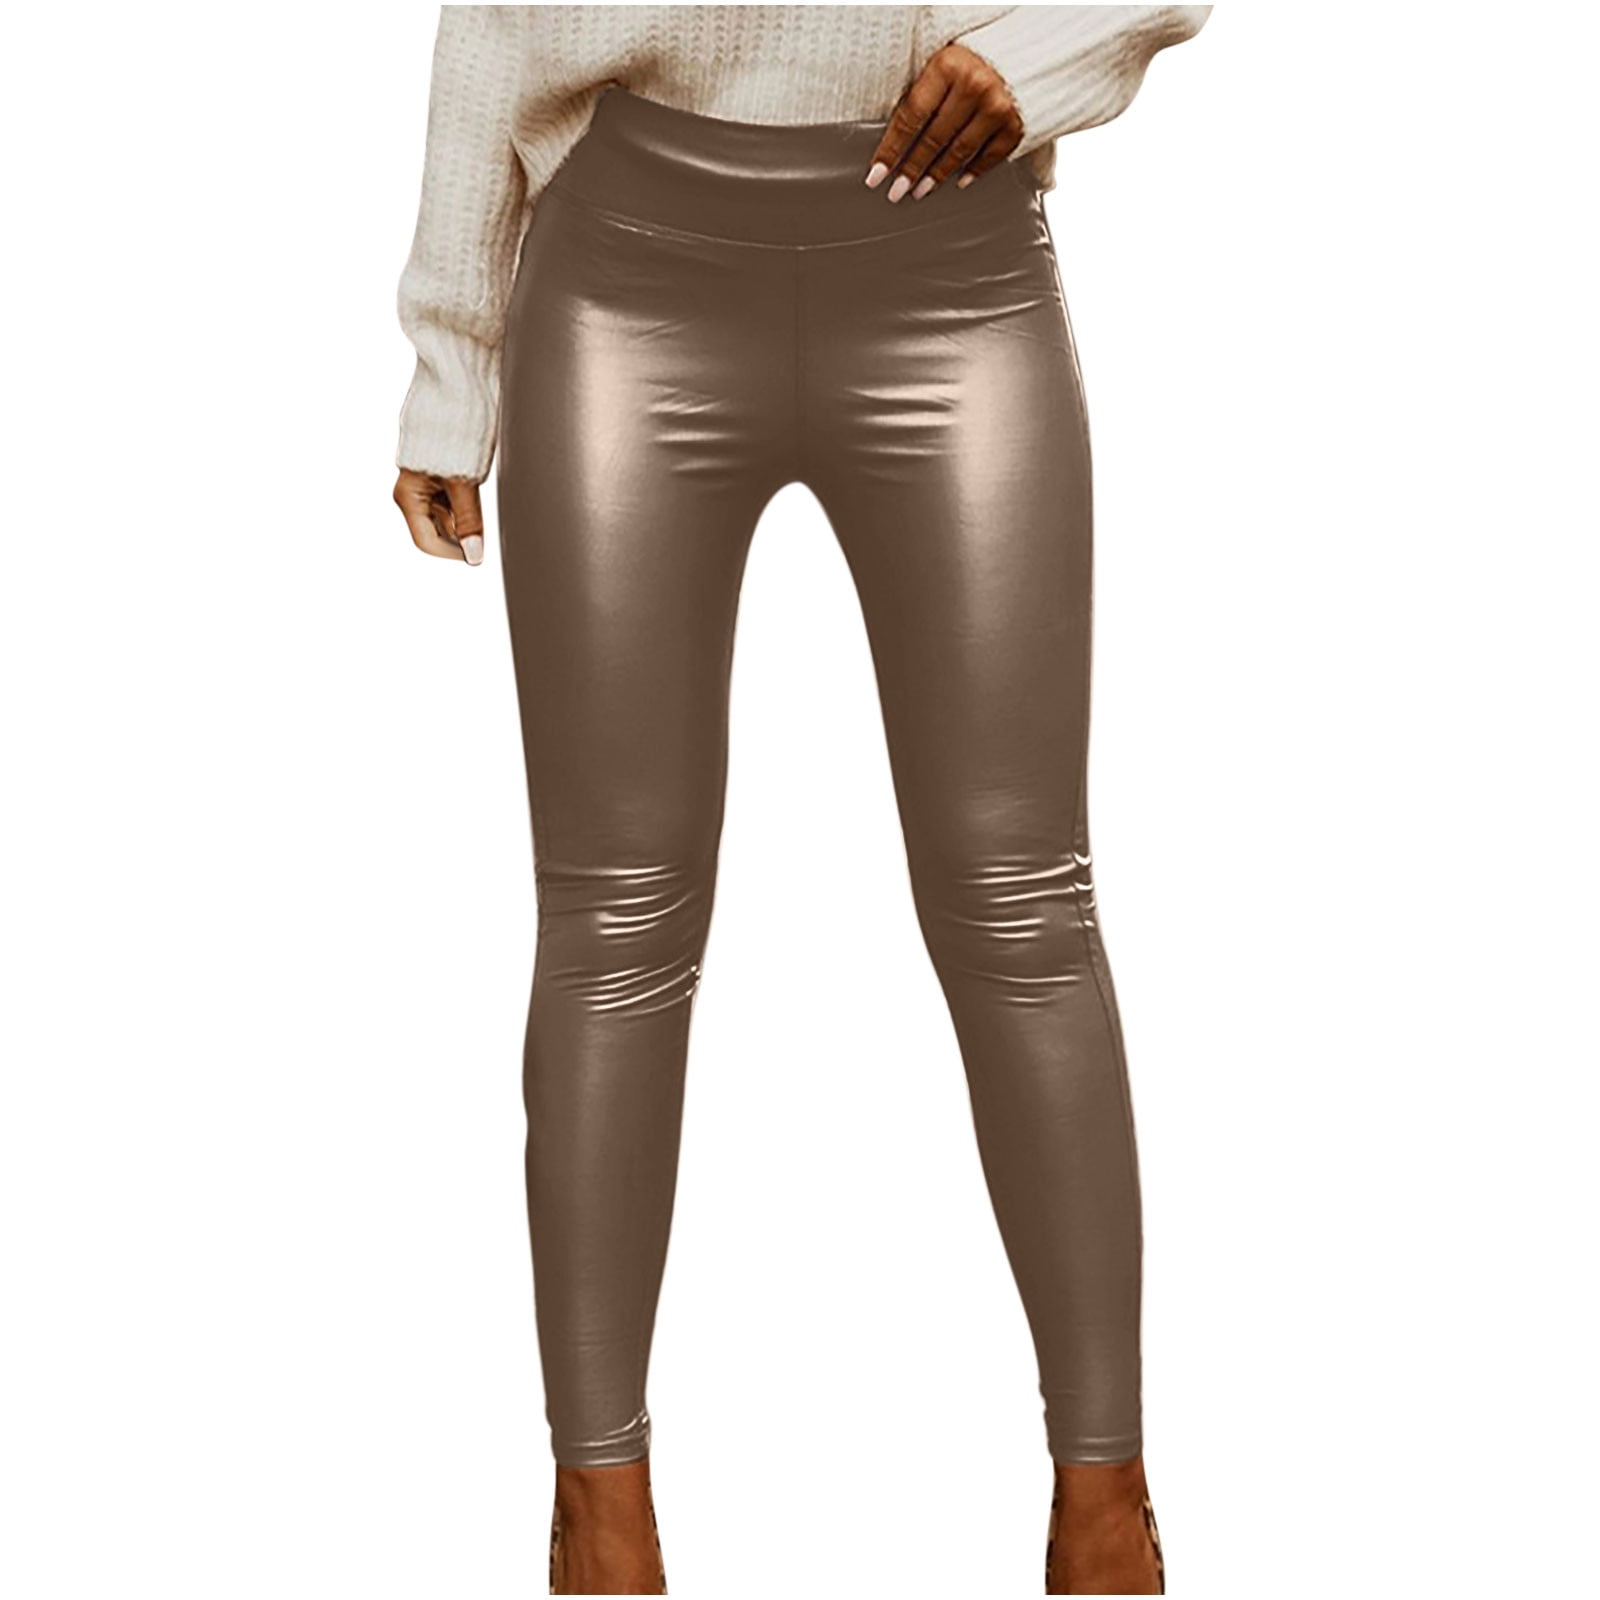 YYDGH Women's Faux Leather Leggings High Waisted Black PU Pleather Pants  Sexy Butting Lifting Tights Brown M